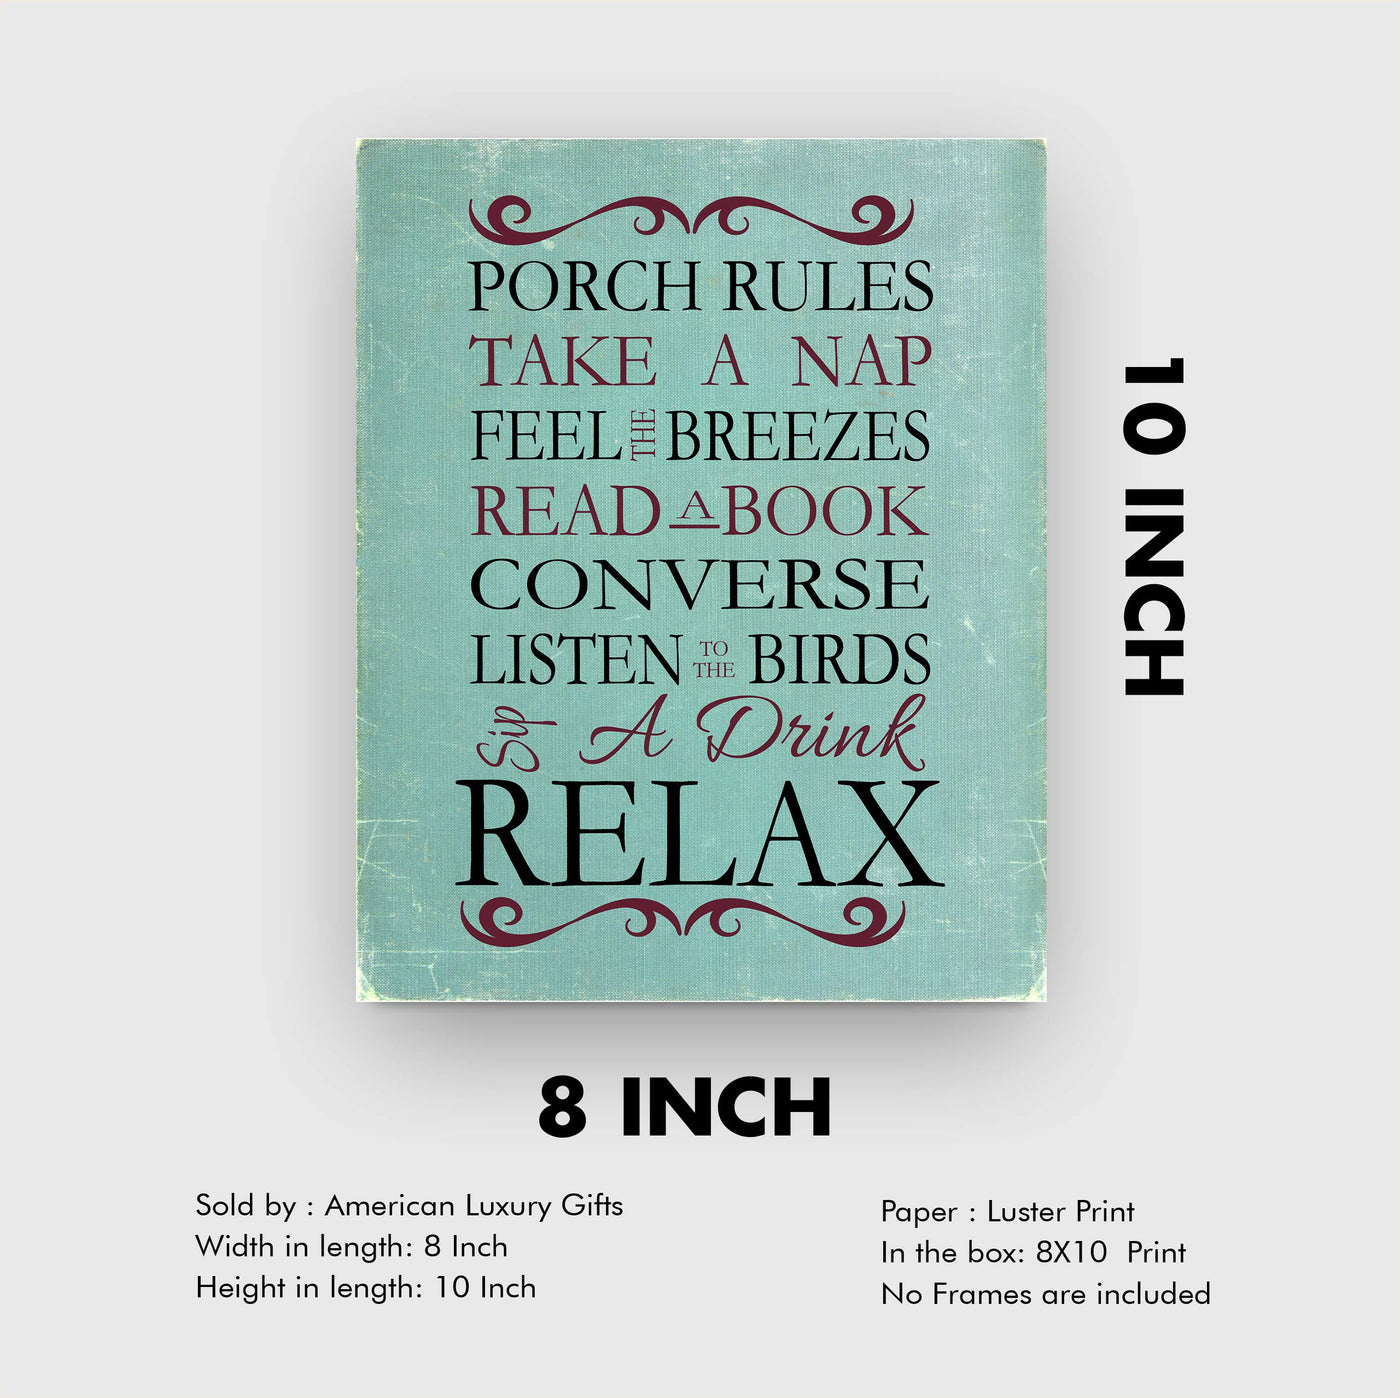 Porch Rules Home Sign Print-8 x 10" Wall Decor Print- Ready to Frame. Distressed Sign Replica Print for Beach-Deck-Cabin-Lake House Decor. Fun Relaxation Quips & Sayings. Great Housewarming Gift!